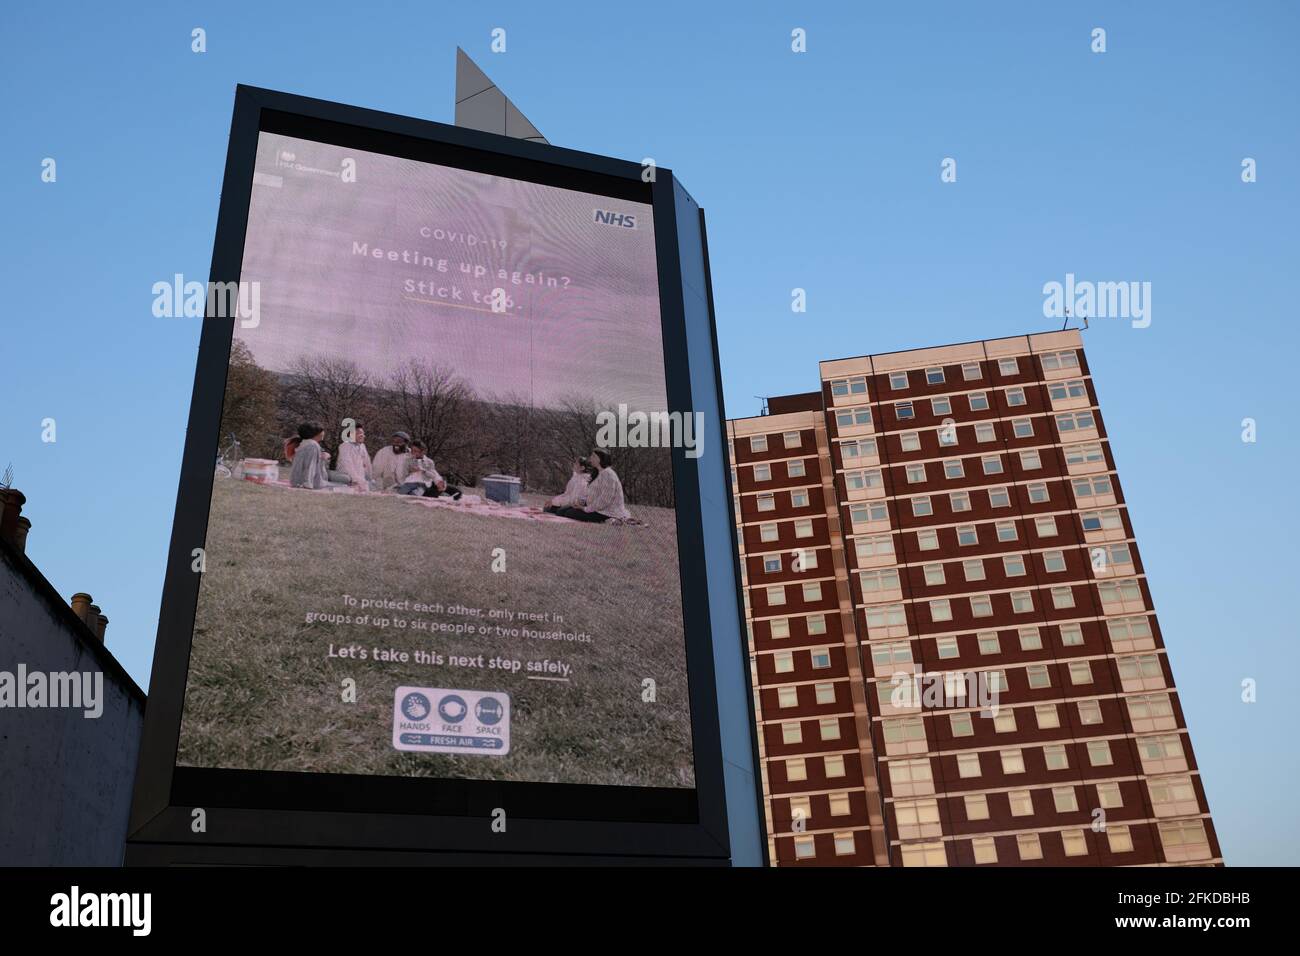 London, UK - 20 Apr 2021: A government advert reminds people to adopt the rule of 6 when meeting outside as coronavirus restrictions start to be lifted. Stock Photo